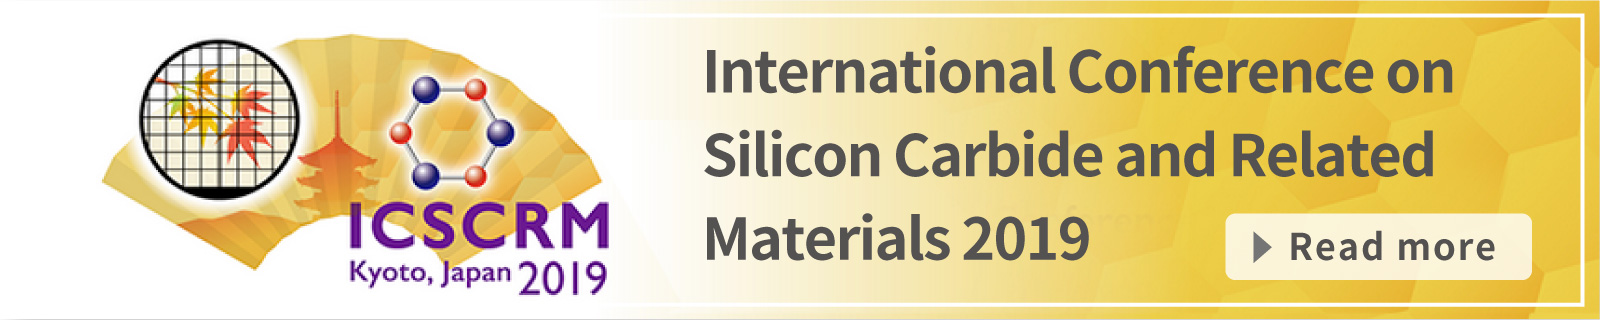 Review of the International SiC Conference (ICSCRM) 2019